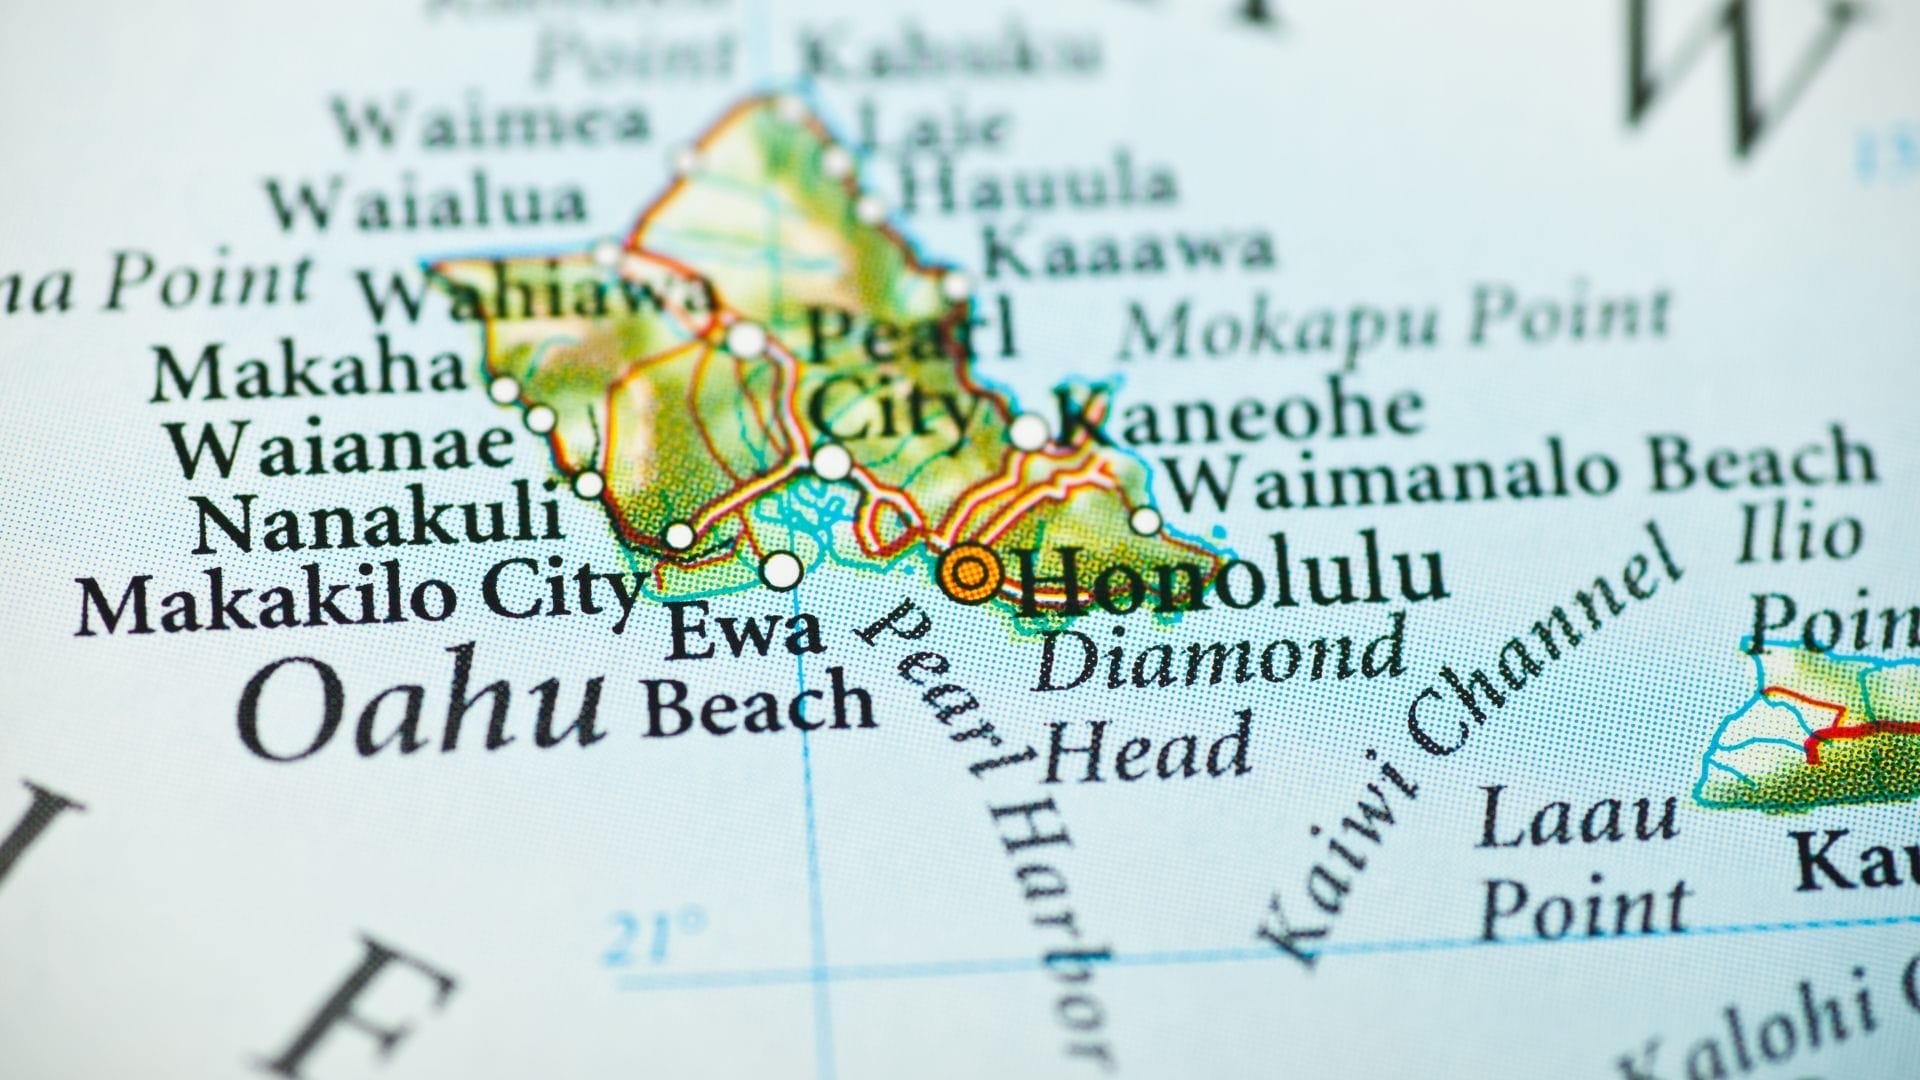 Planning Your Trip to Oahu